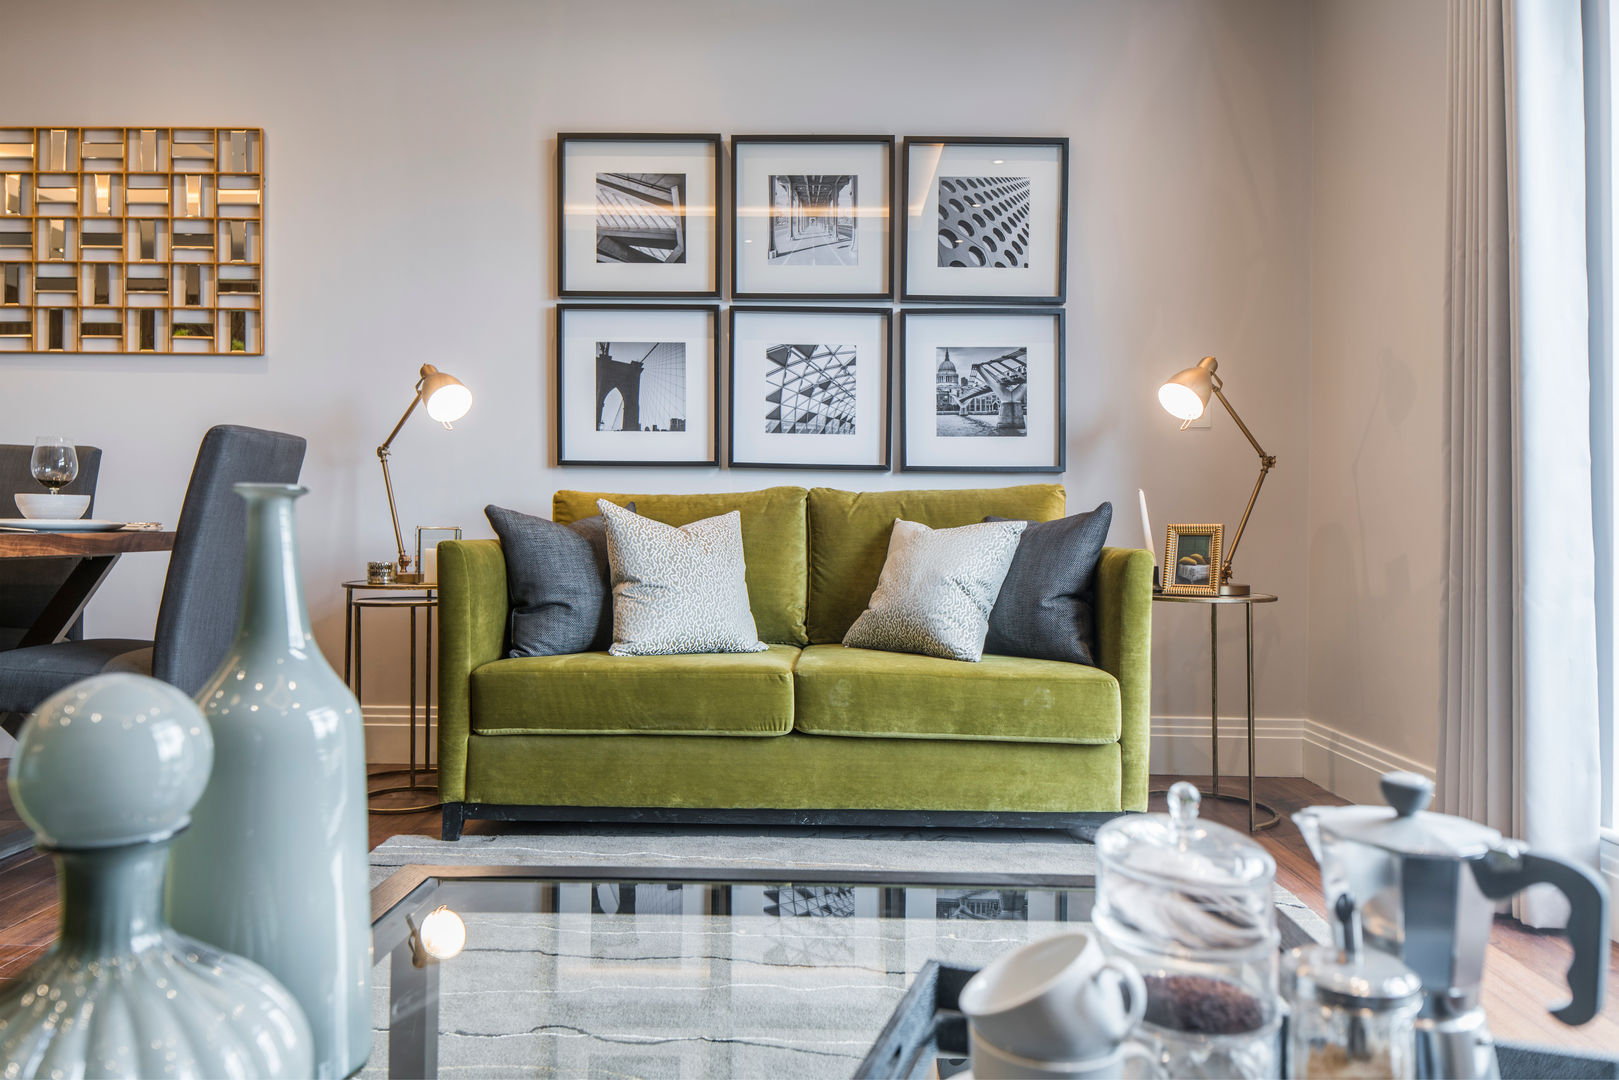 Musewll Hill, London Jigsaw Interior Architecture & Design Eclectic style living room Copper/Bronze/Brass green sofa,velvet,luxury,london,jigsaw interiors,modern,copper,picture wall,open-plan